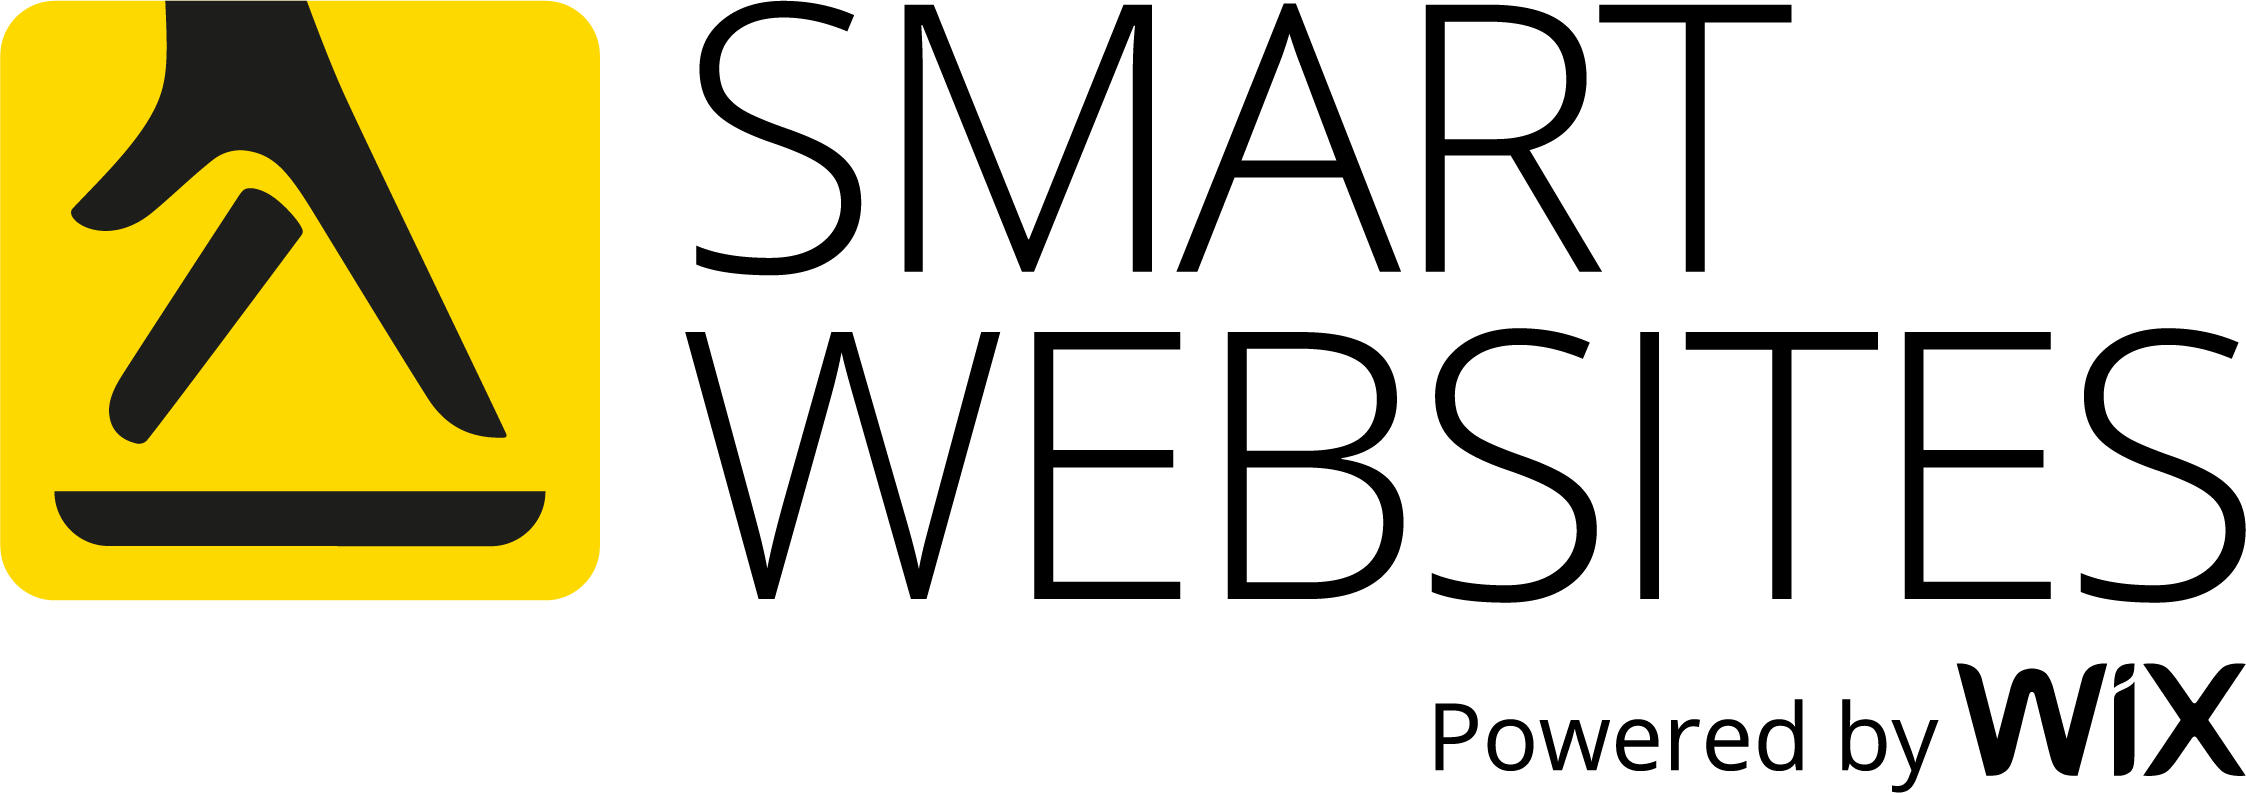 Smart Websites powered by WixWix